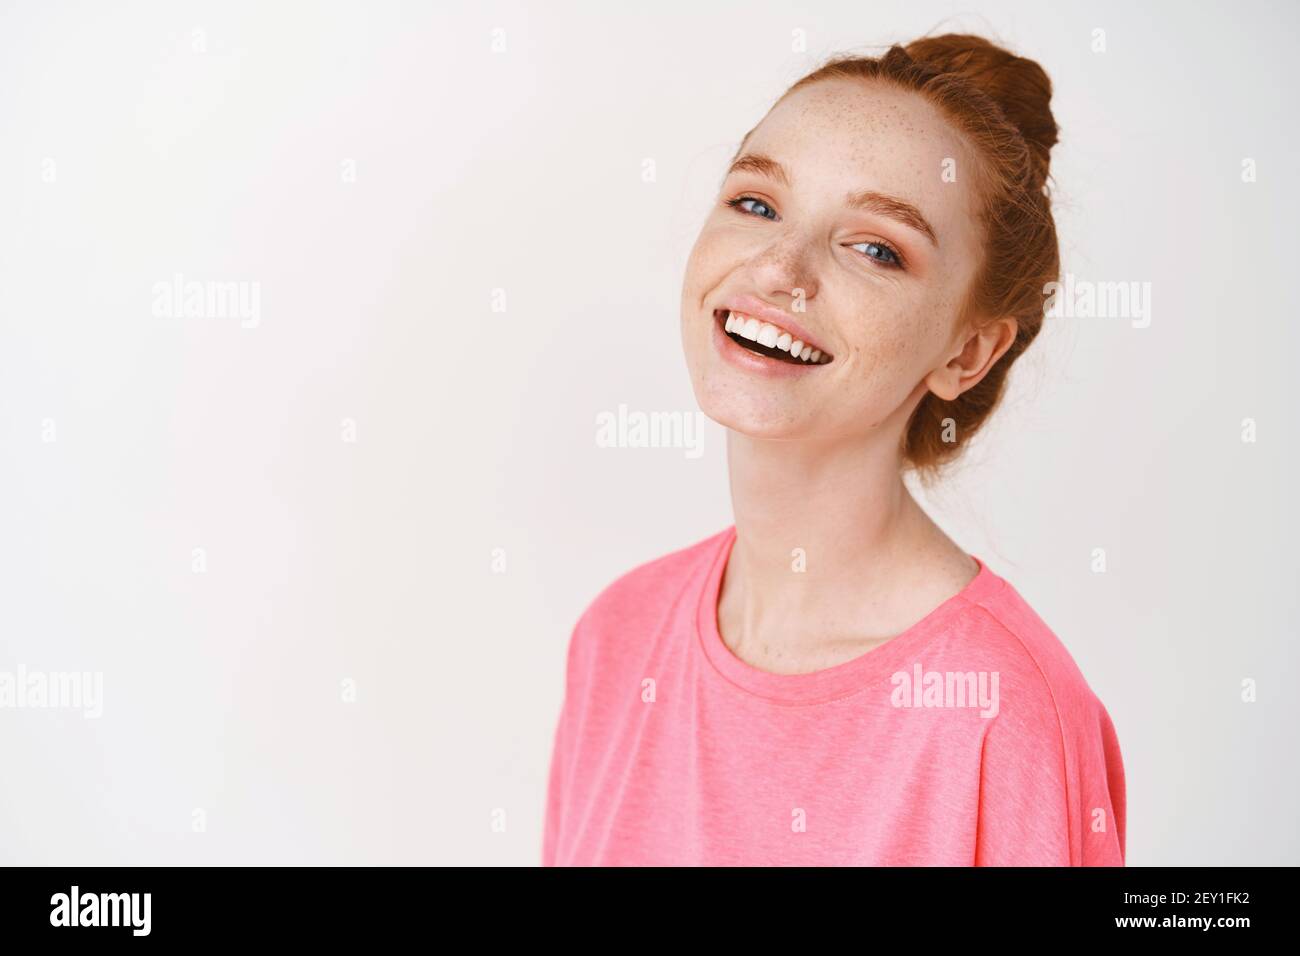 Skincare and makeup concept. Happy young woman with ginger hair combed in messy bun, natural makeup and freckles, laughing and showing white teeth Stock Photo